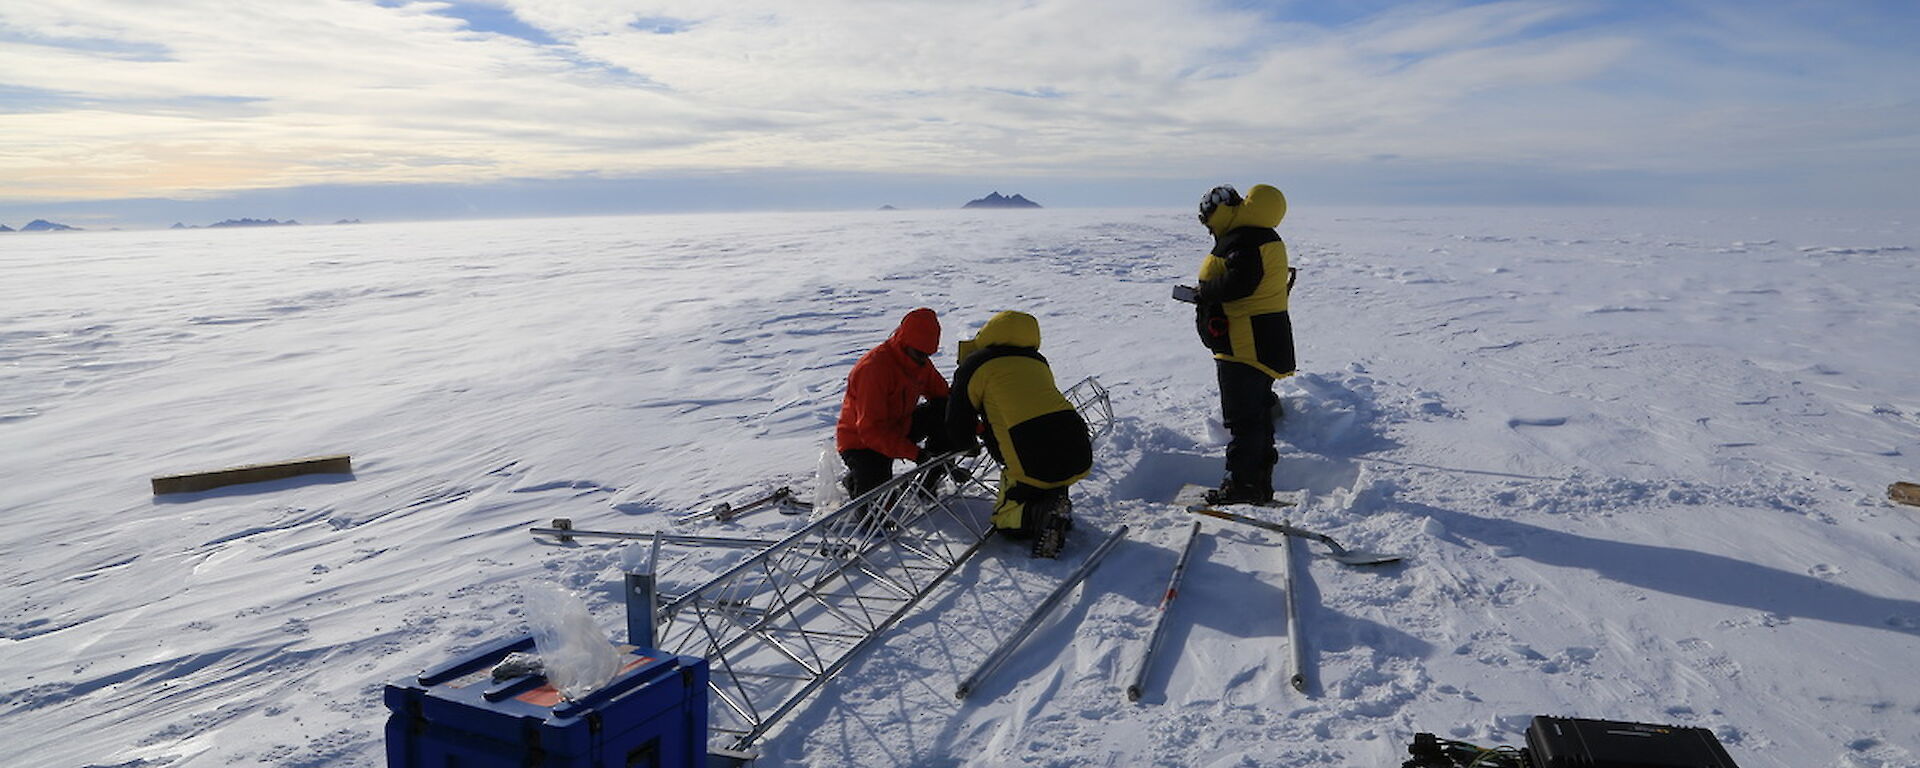 Metals rods of the Auto weather station laid out on the ice